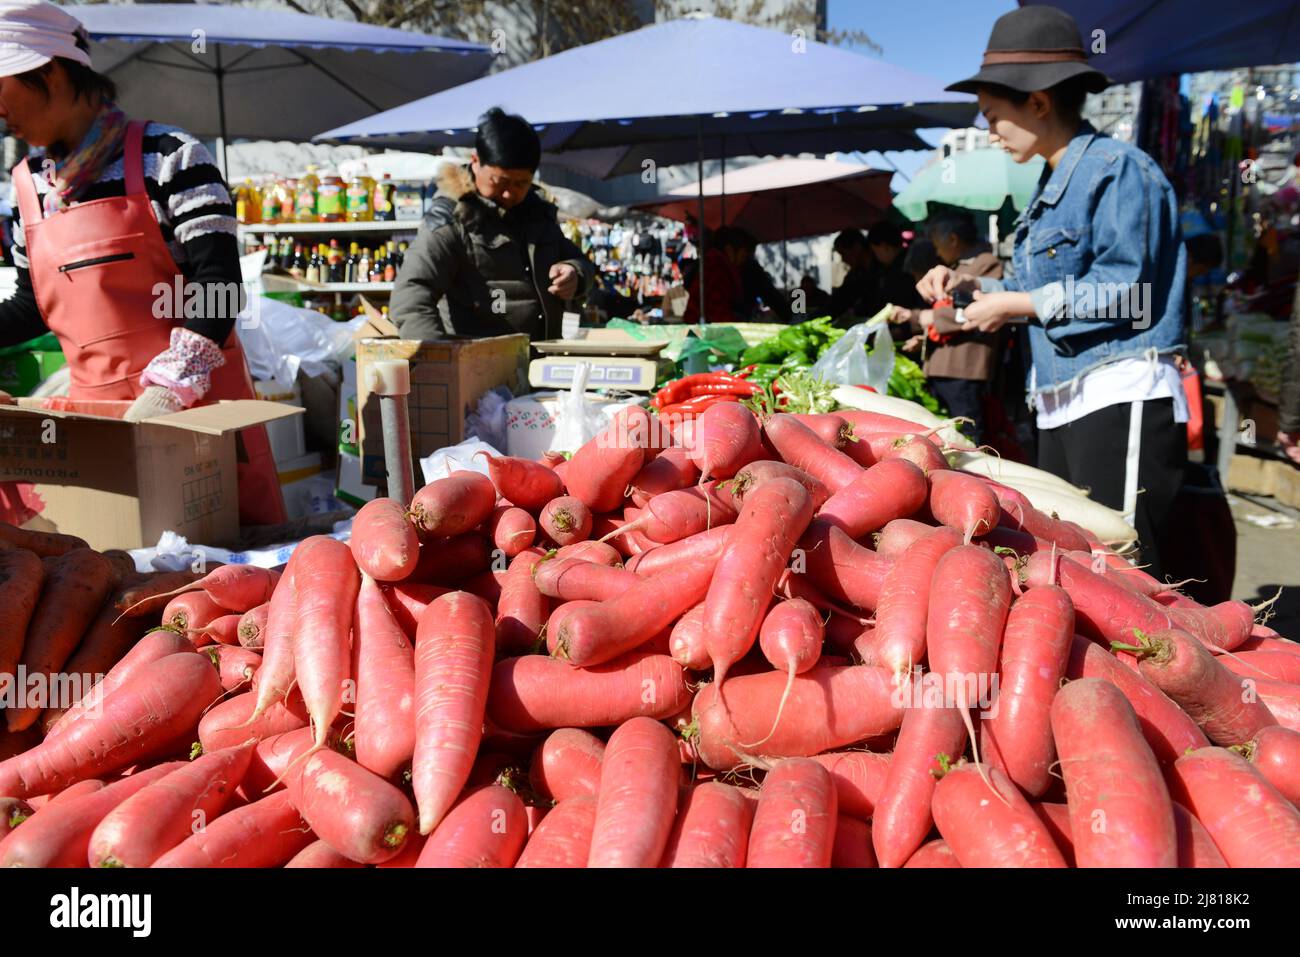 A large colorful fresh produce market in chaoyangmen, Beijing, China. Stock Photo